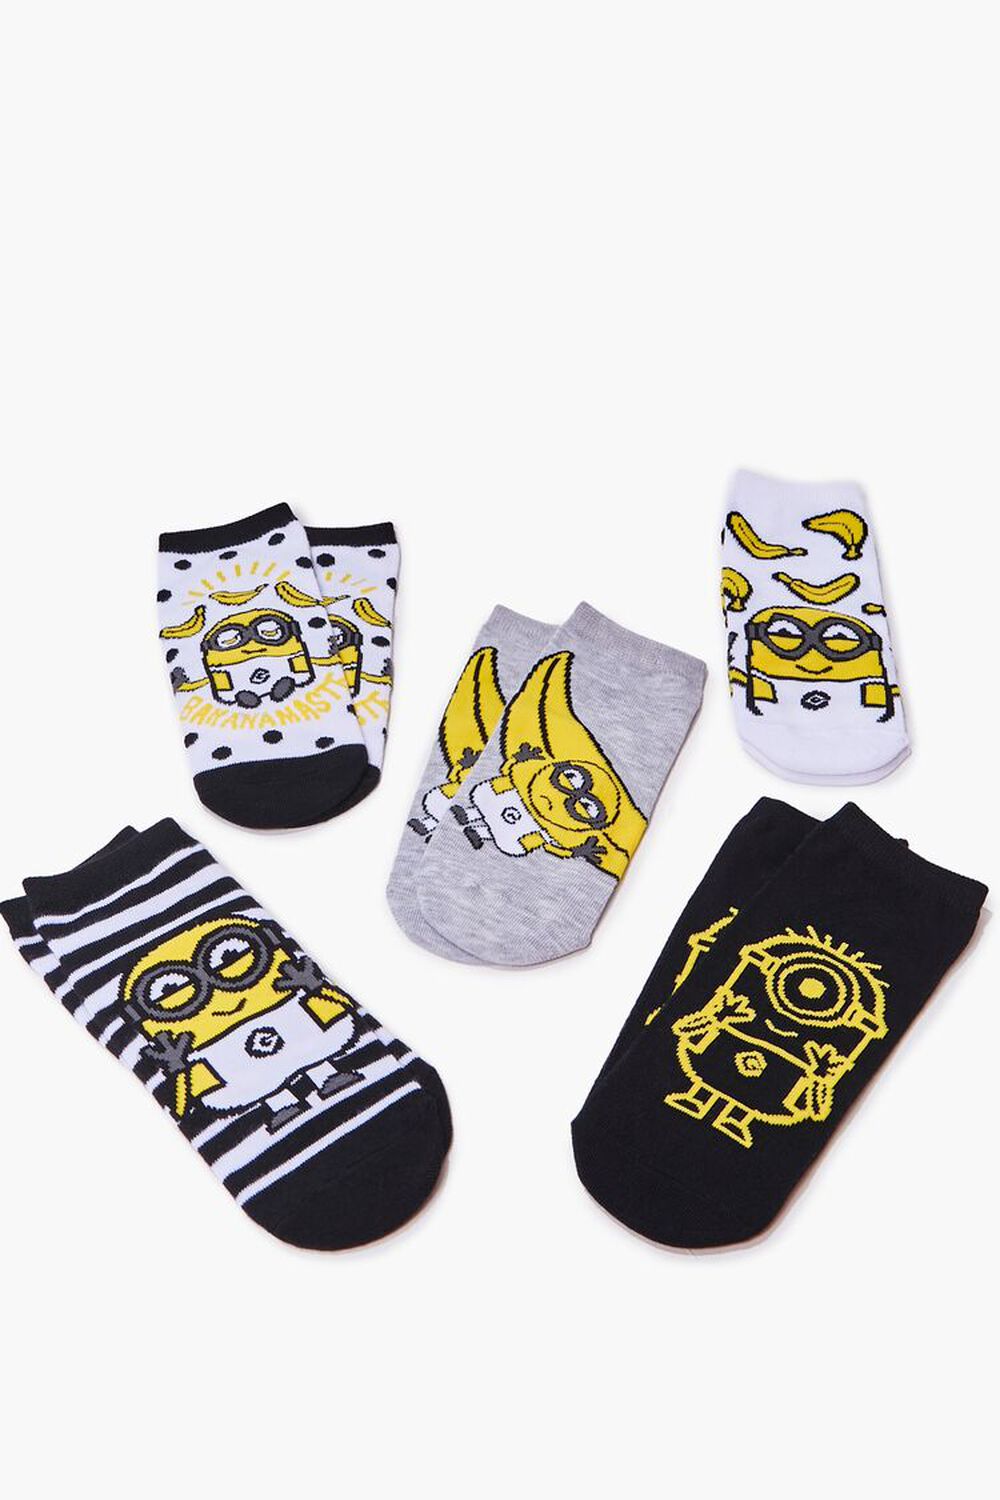 Minion Graphic Ankle Sock Set - 5 pack, image 2